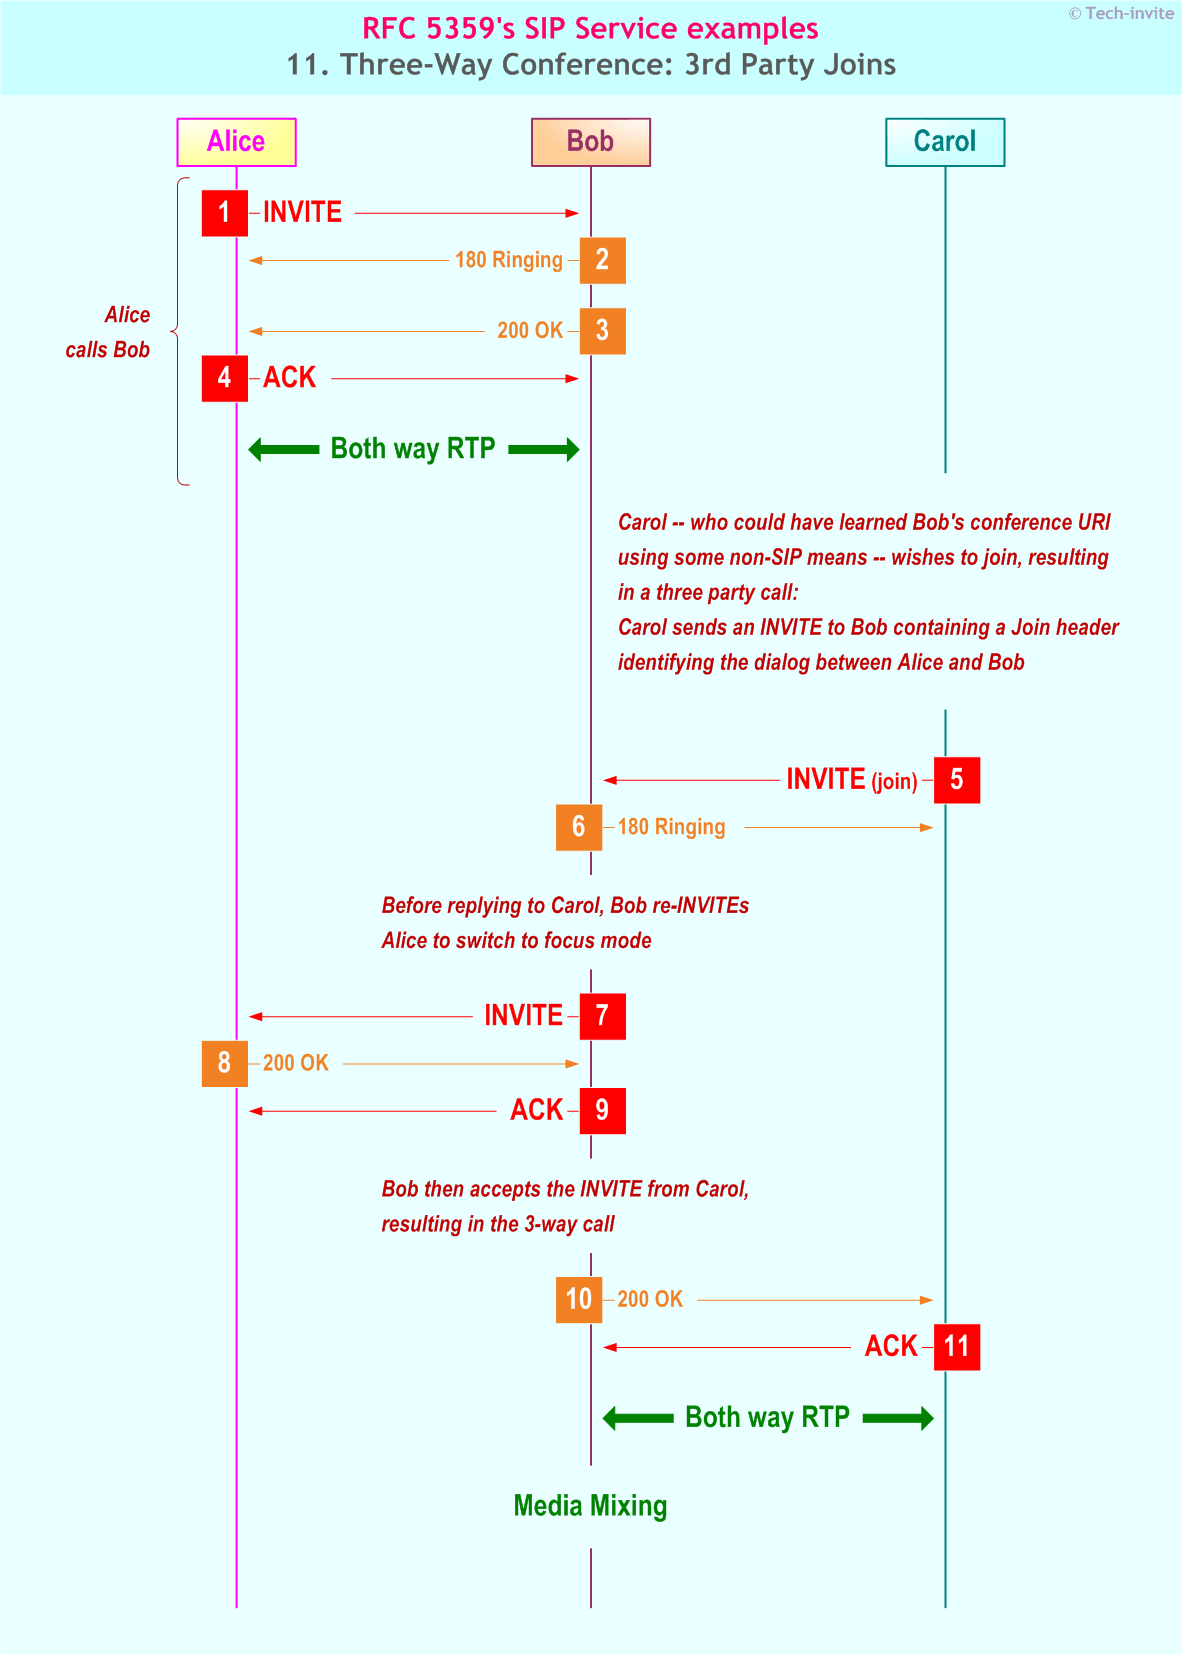 3Way Conference (Third Party Joins) SIP Service example Sequence chart